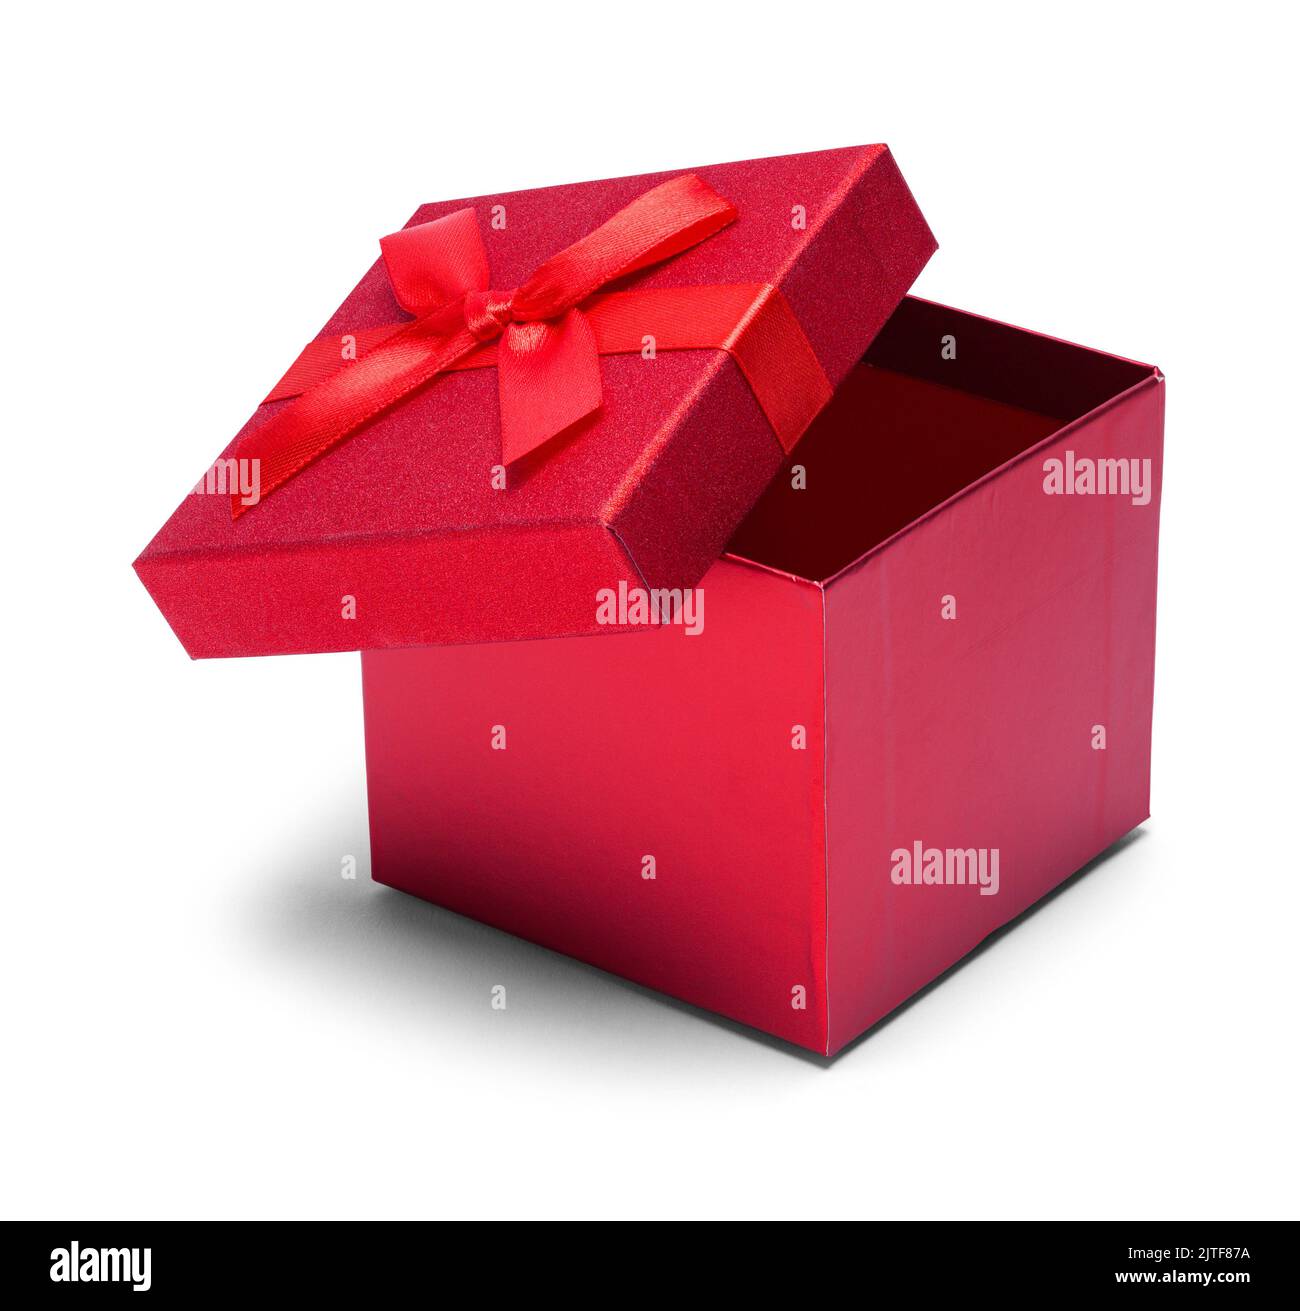 Small Square Red Present Box Cut Out. Stock Photo